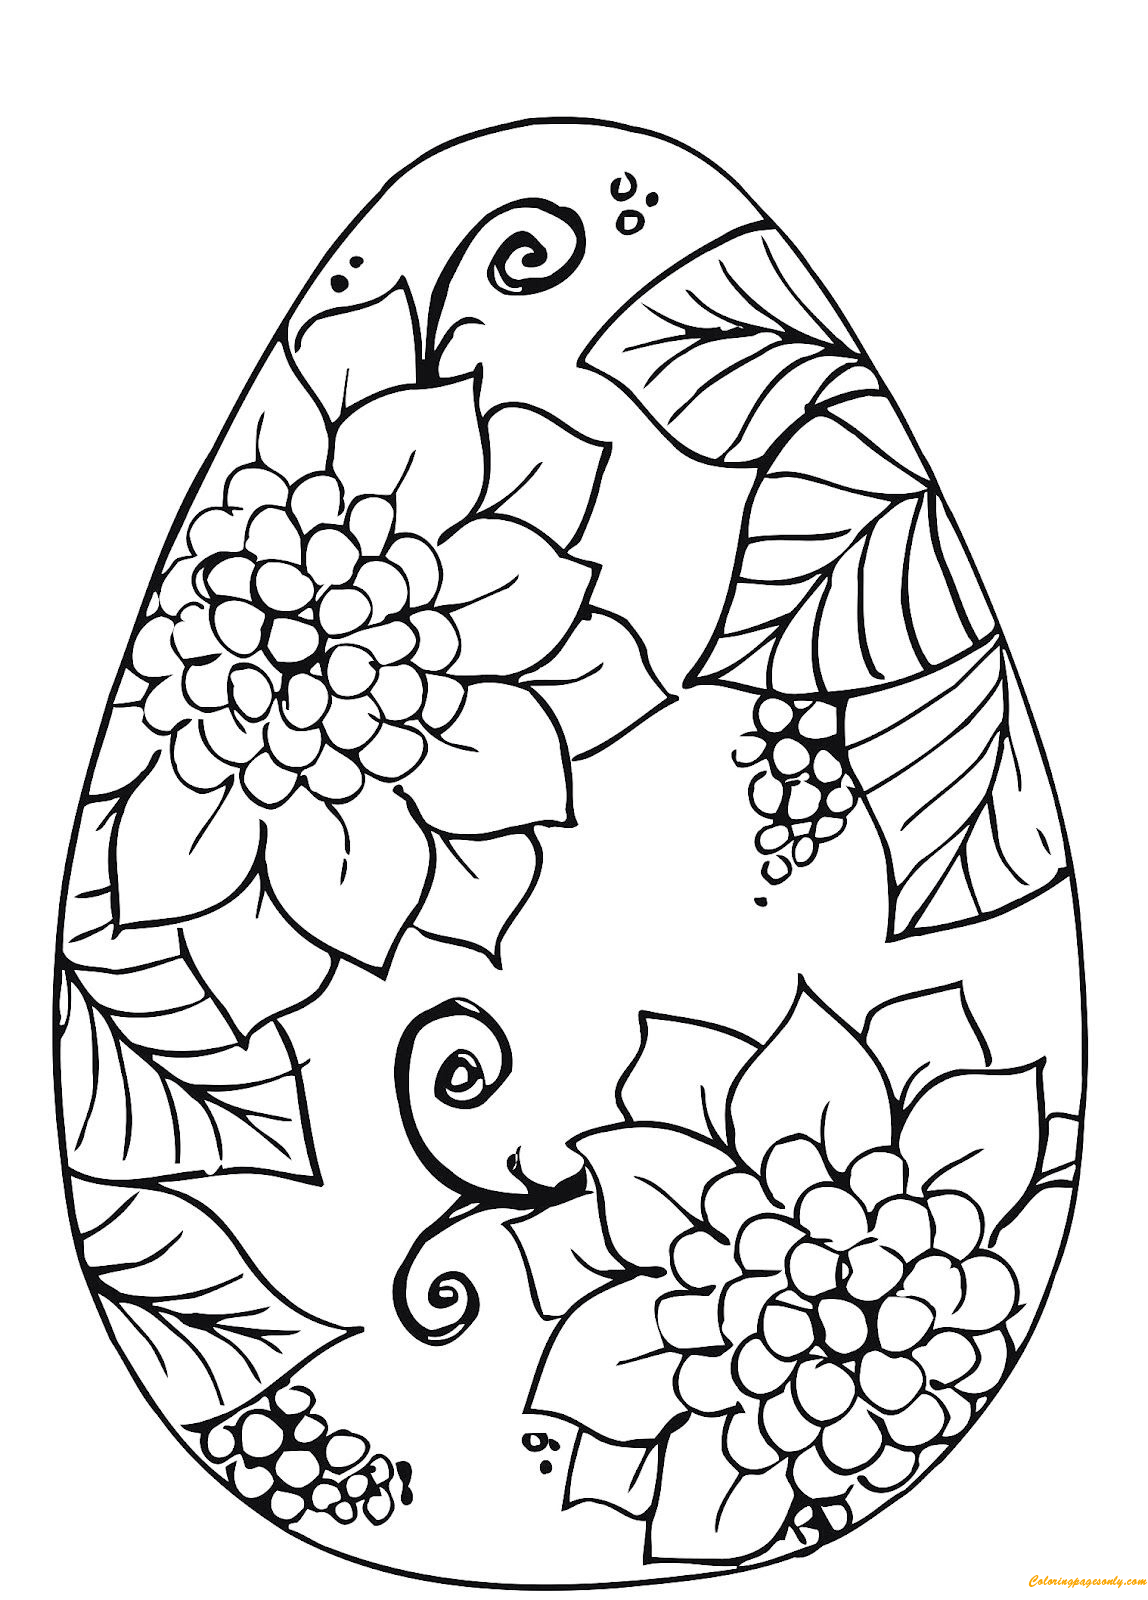 Easter Egg Flower Pattern Coloring Page